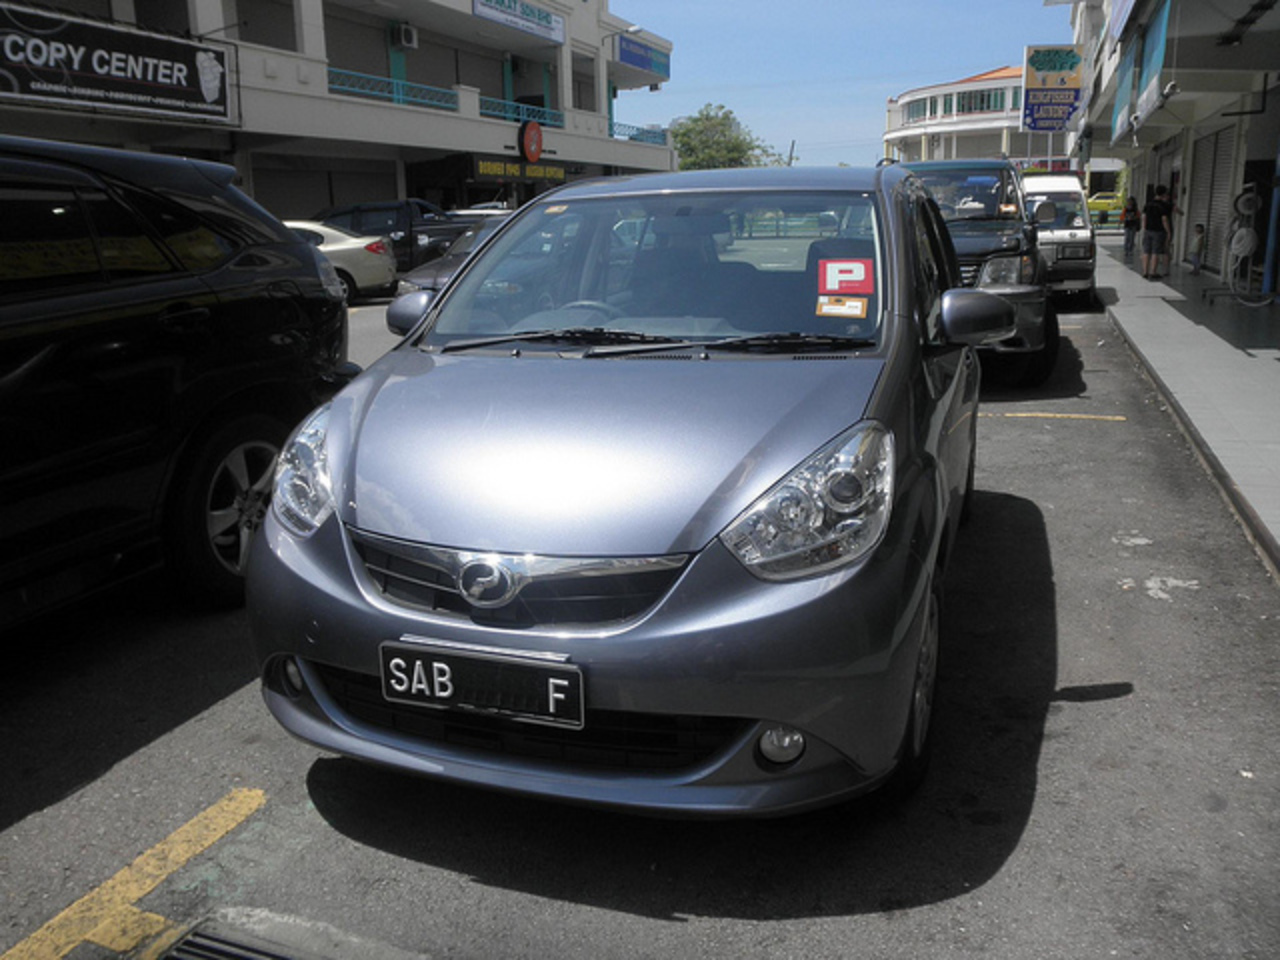 Front View Of The 2011 Perodua Myvi | Flickr - Photo Sharing!